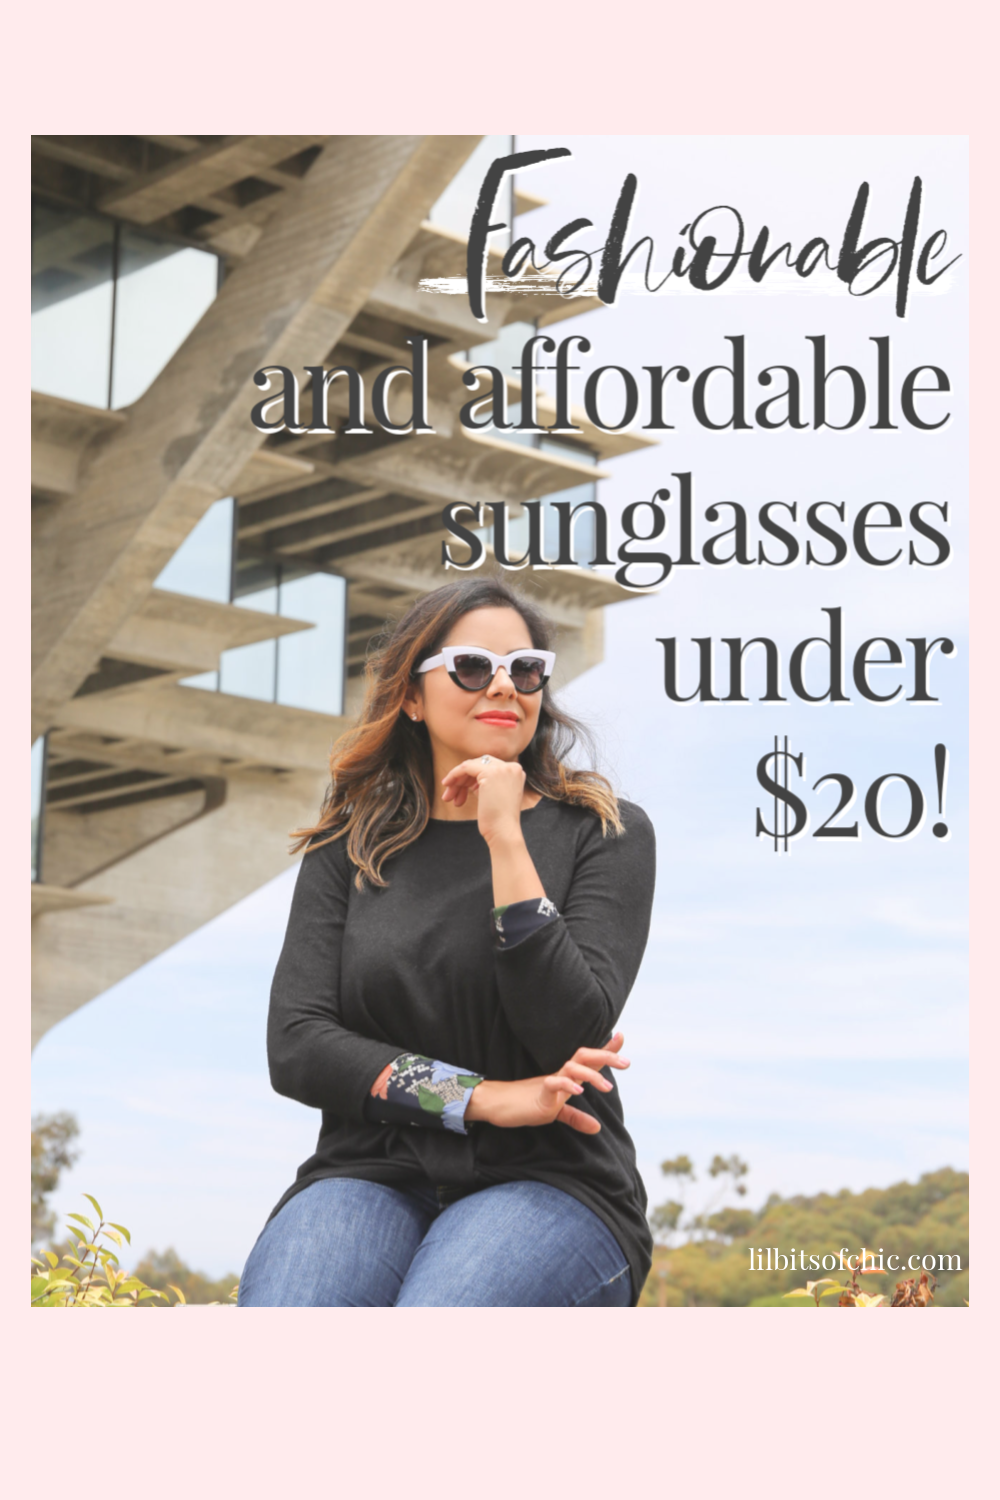 Cute and Affordable sunglasses under $20, Amazon Fashion Sunglasses, sunglasses that look expensive but are affordable